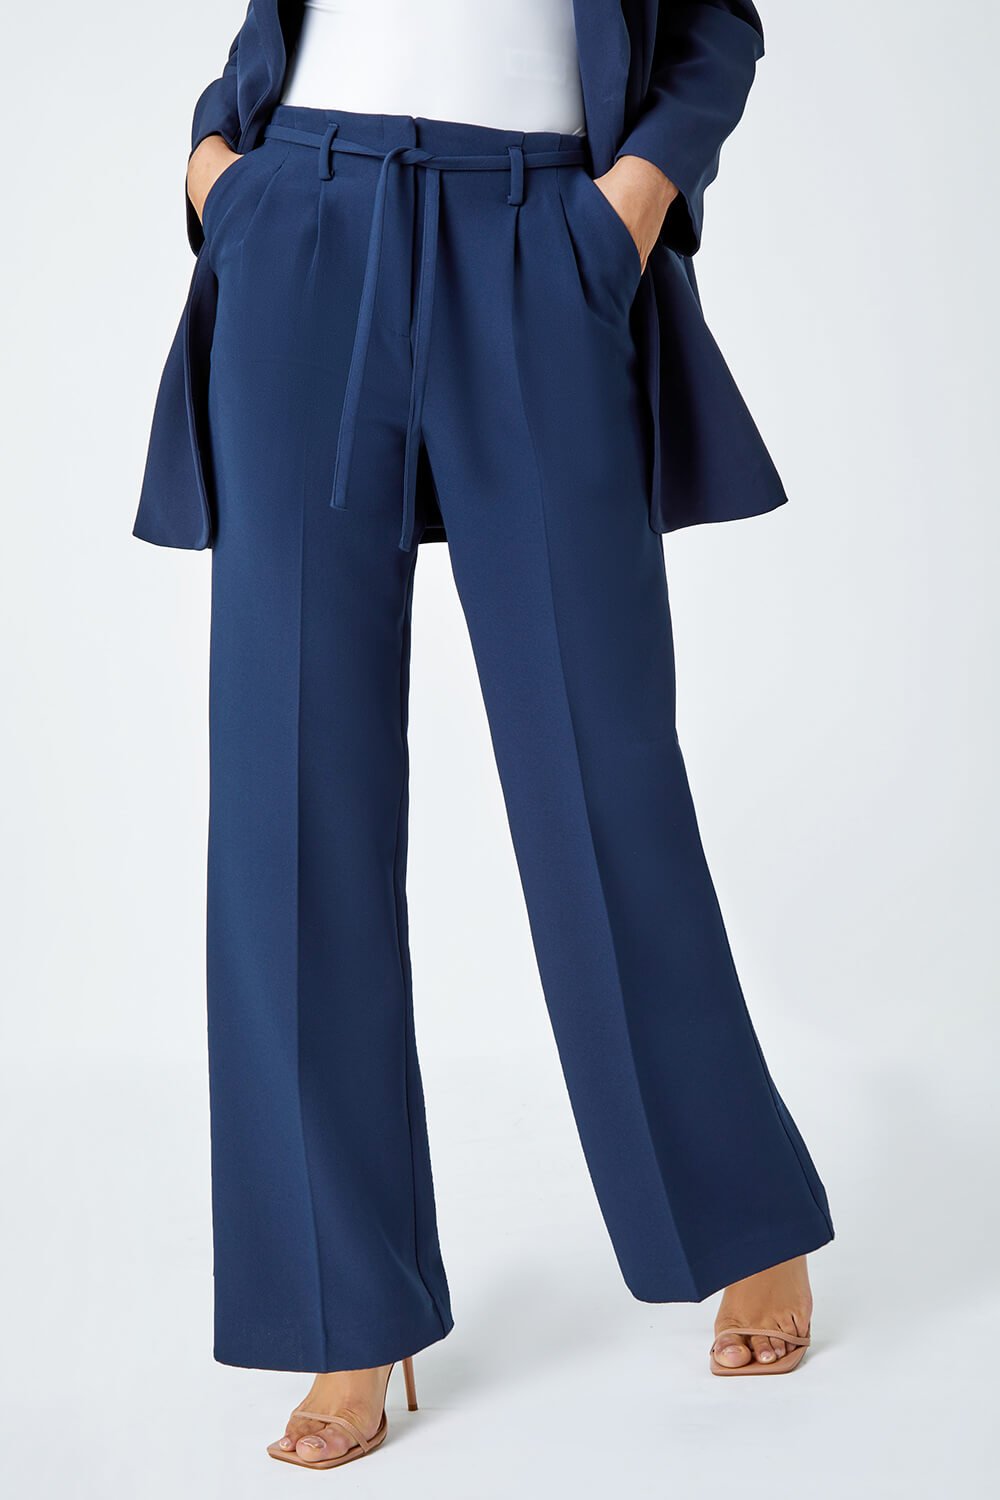 Navy  Crepe Stretch Straight Leg Trousers, Image 4 of 6